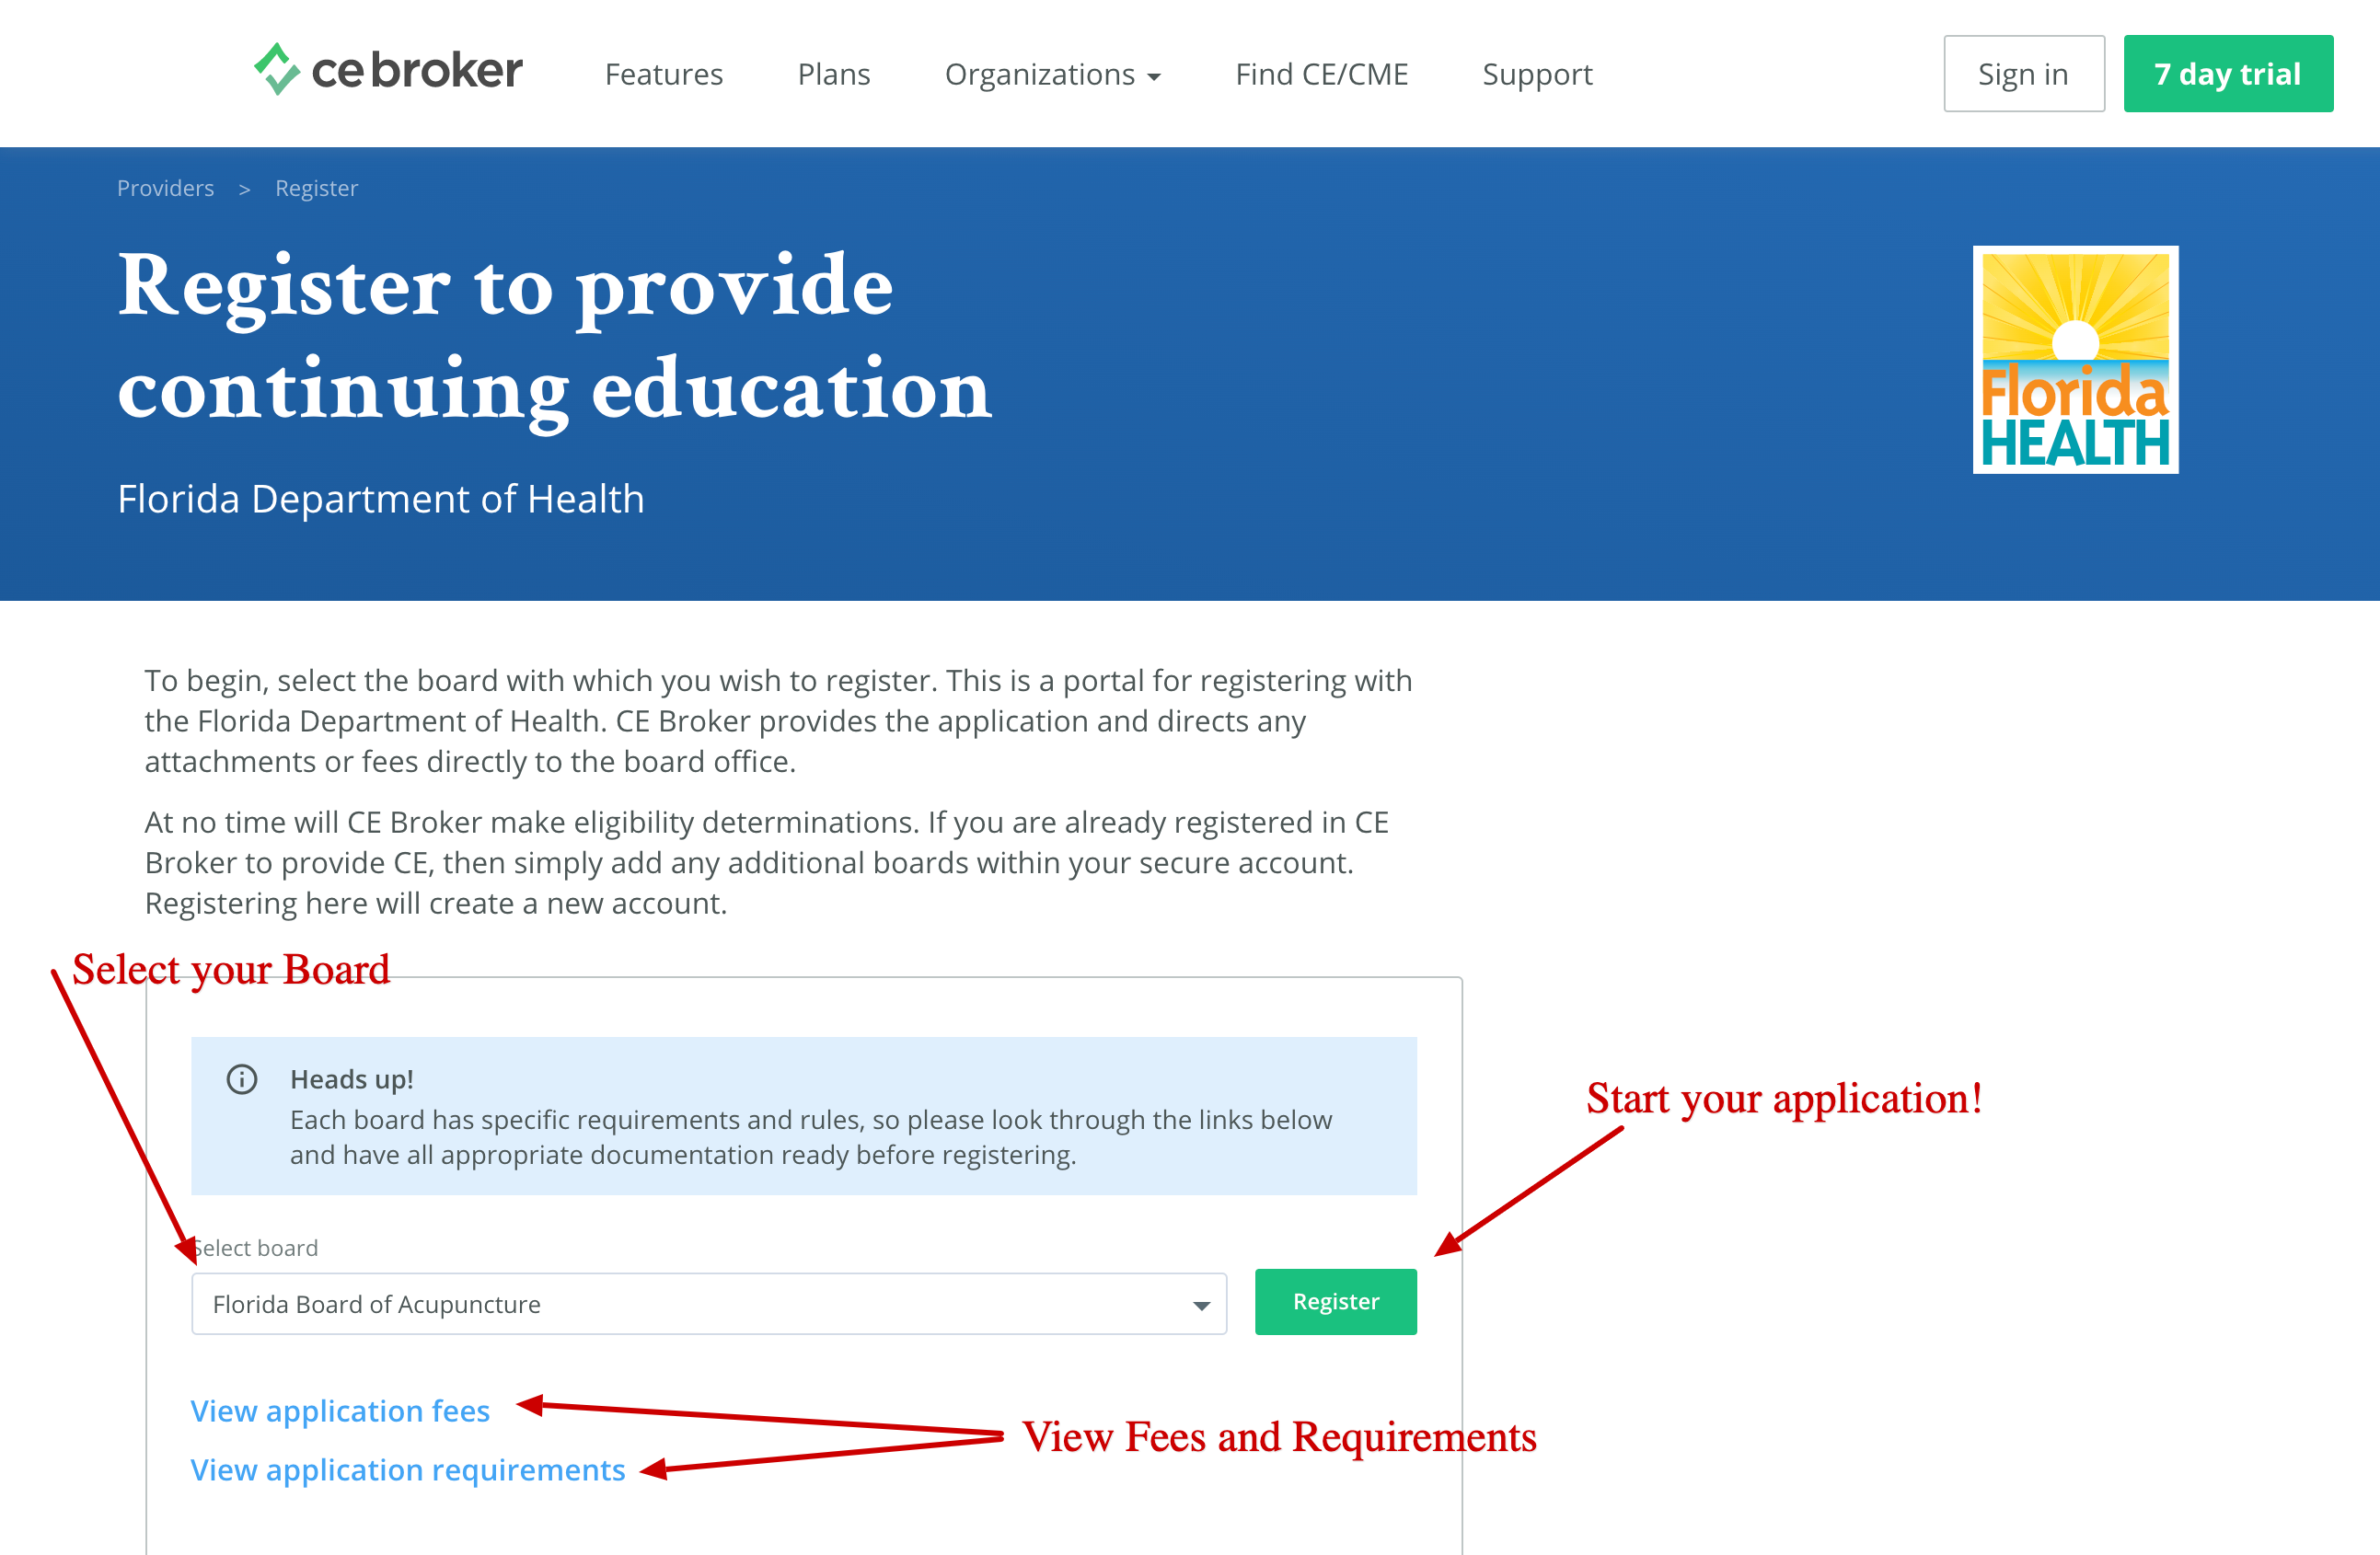 Screenshot of the Provider registration page for the Florida Department of Health. An arrow points to a drop down menu where you can select a board. Another set of arrows point to the links to view application fees and requirements. Another arrow points to a button that says Register.